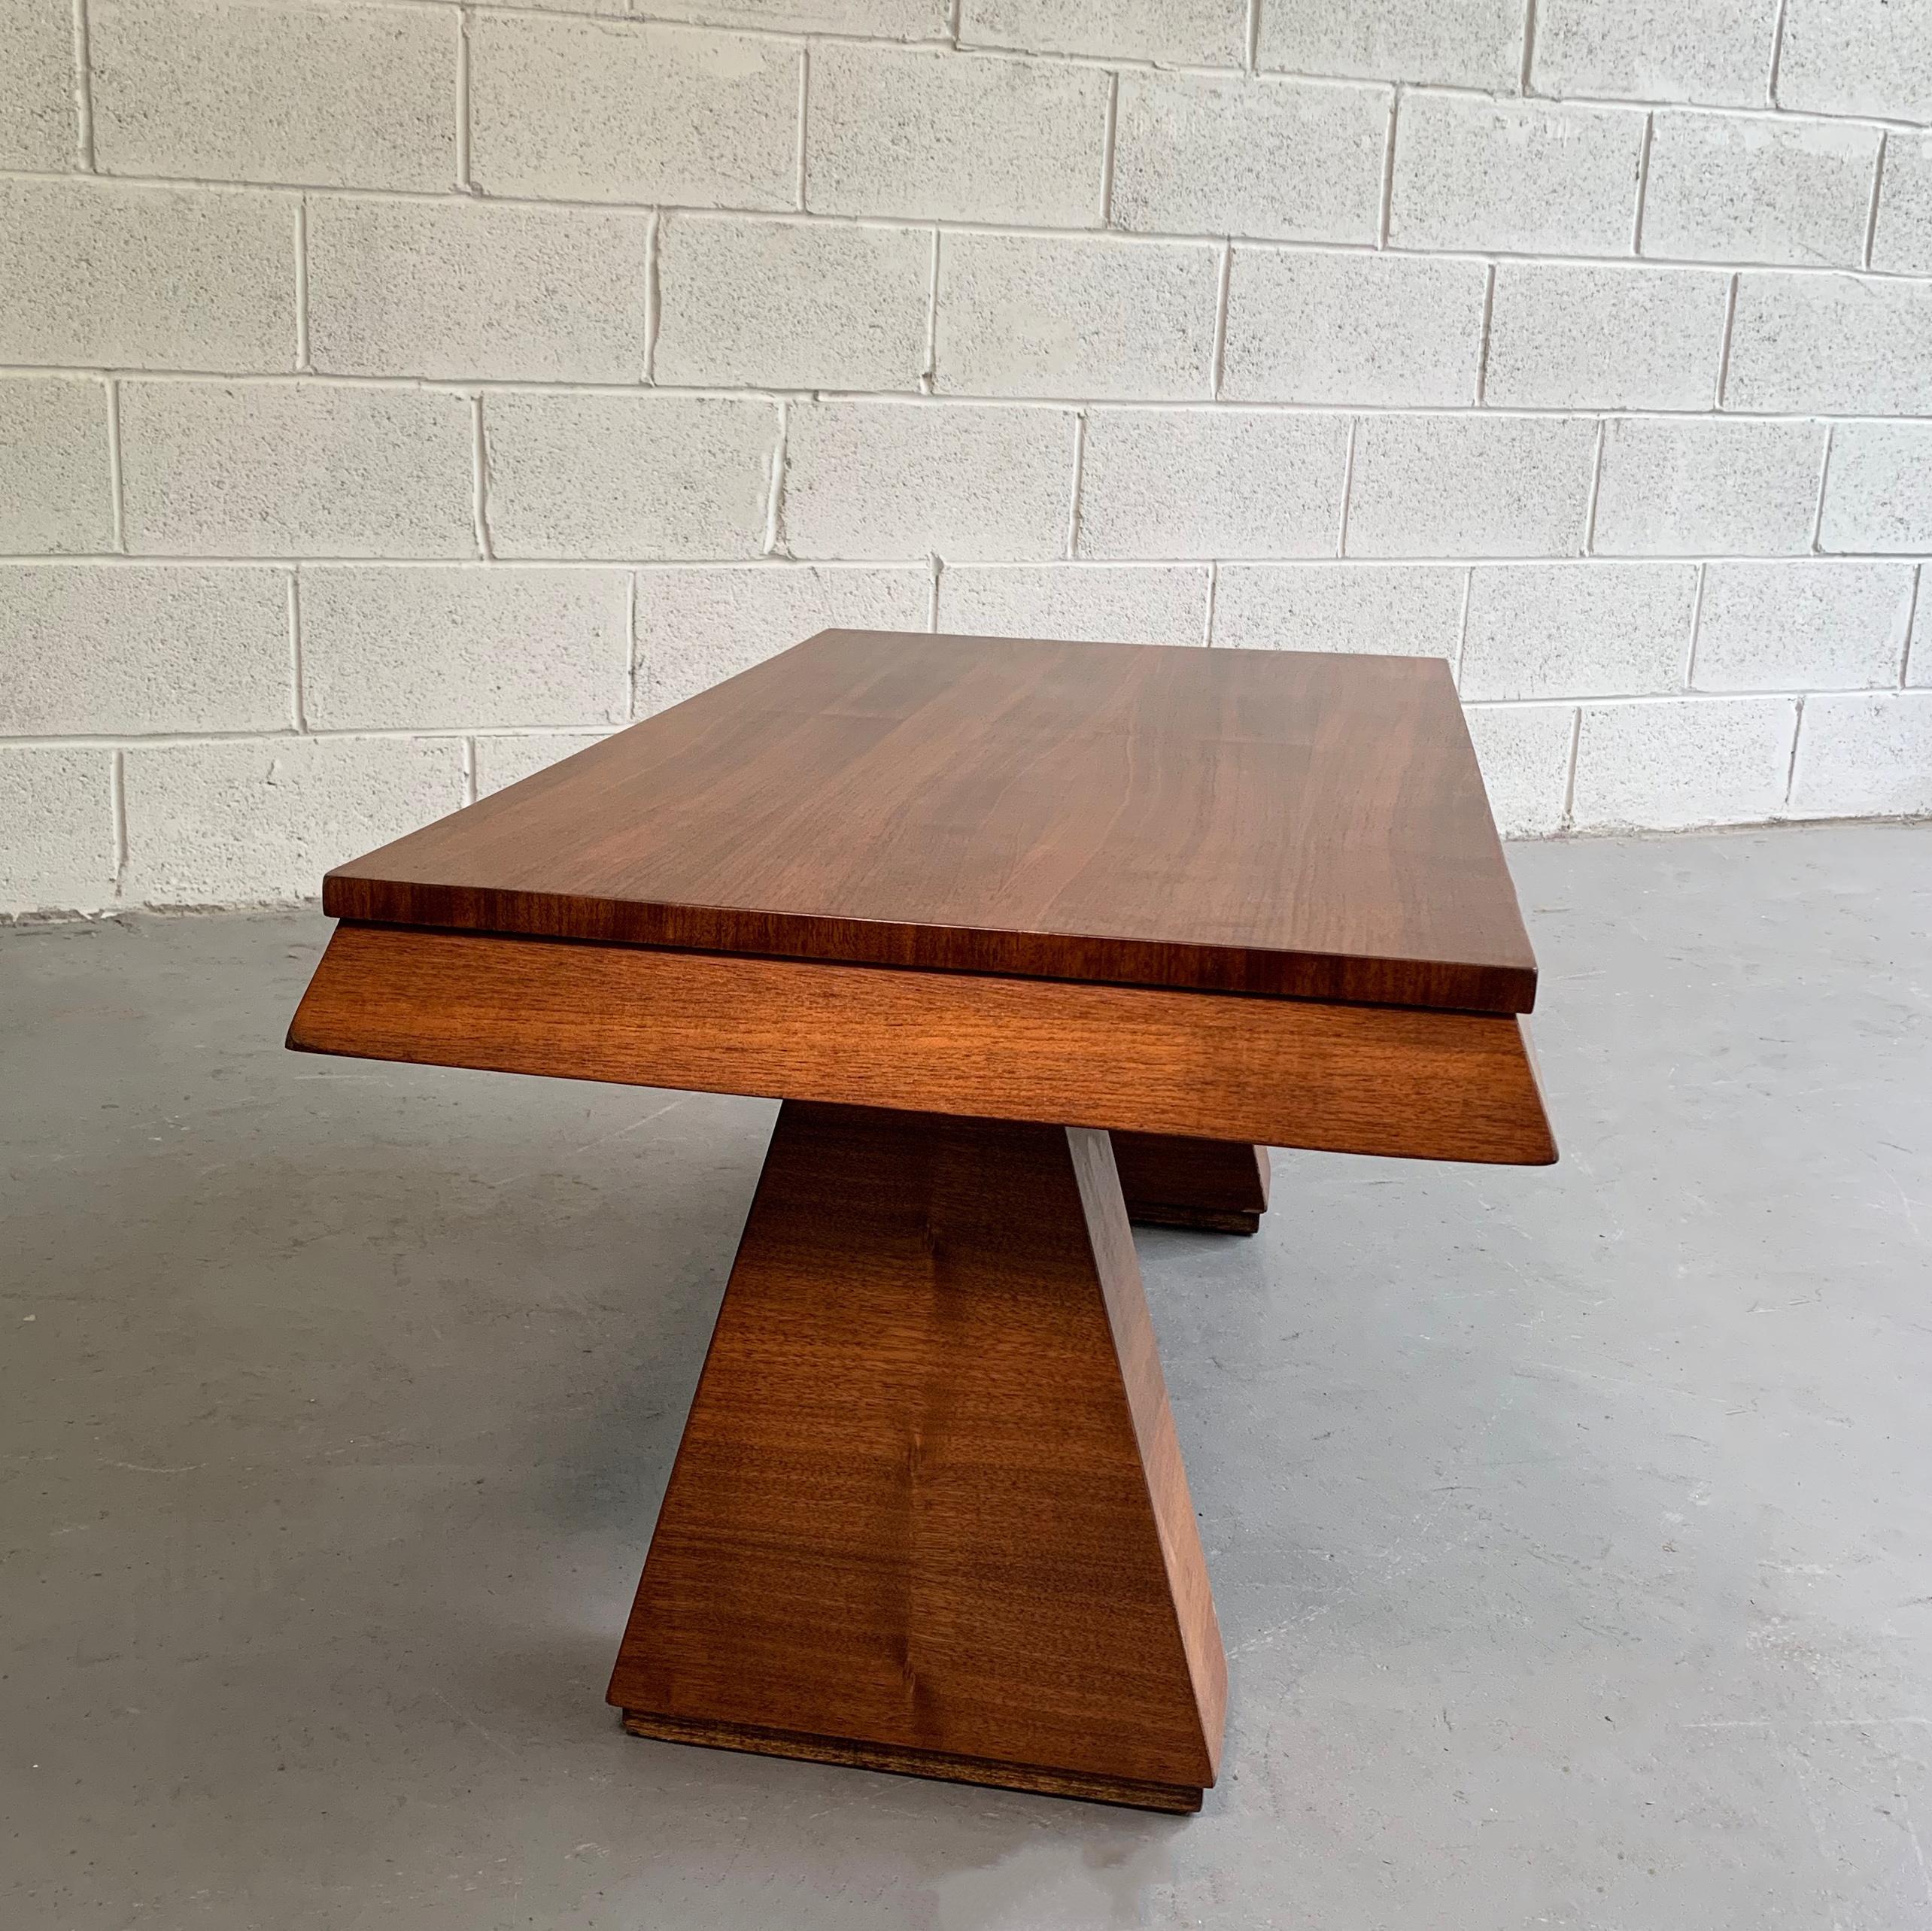 Art Deco Walnut Coffee Table Attributed to Donald Deskey For Sale 2